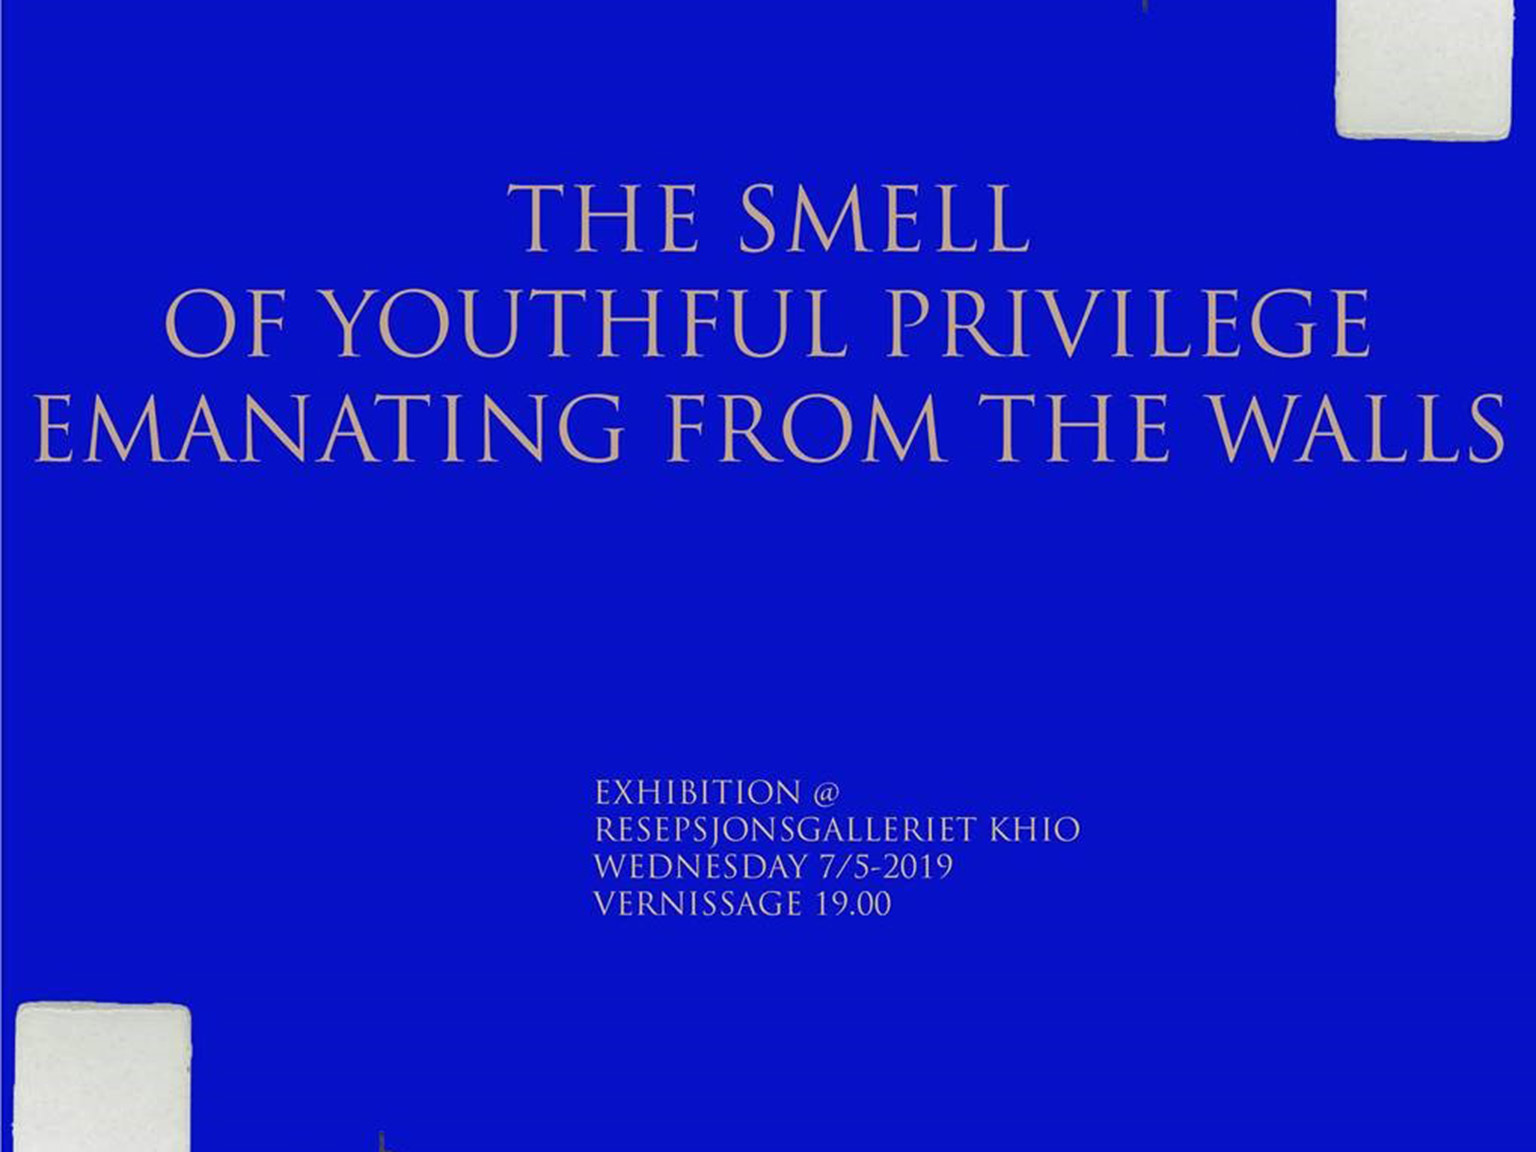 –THE SMELL OF YOUTHFUL PRIVILEGE EMANATING FROM THE WALLS–